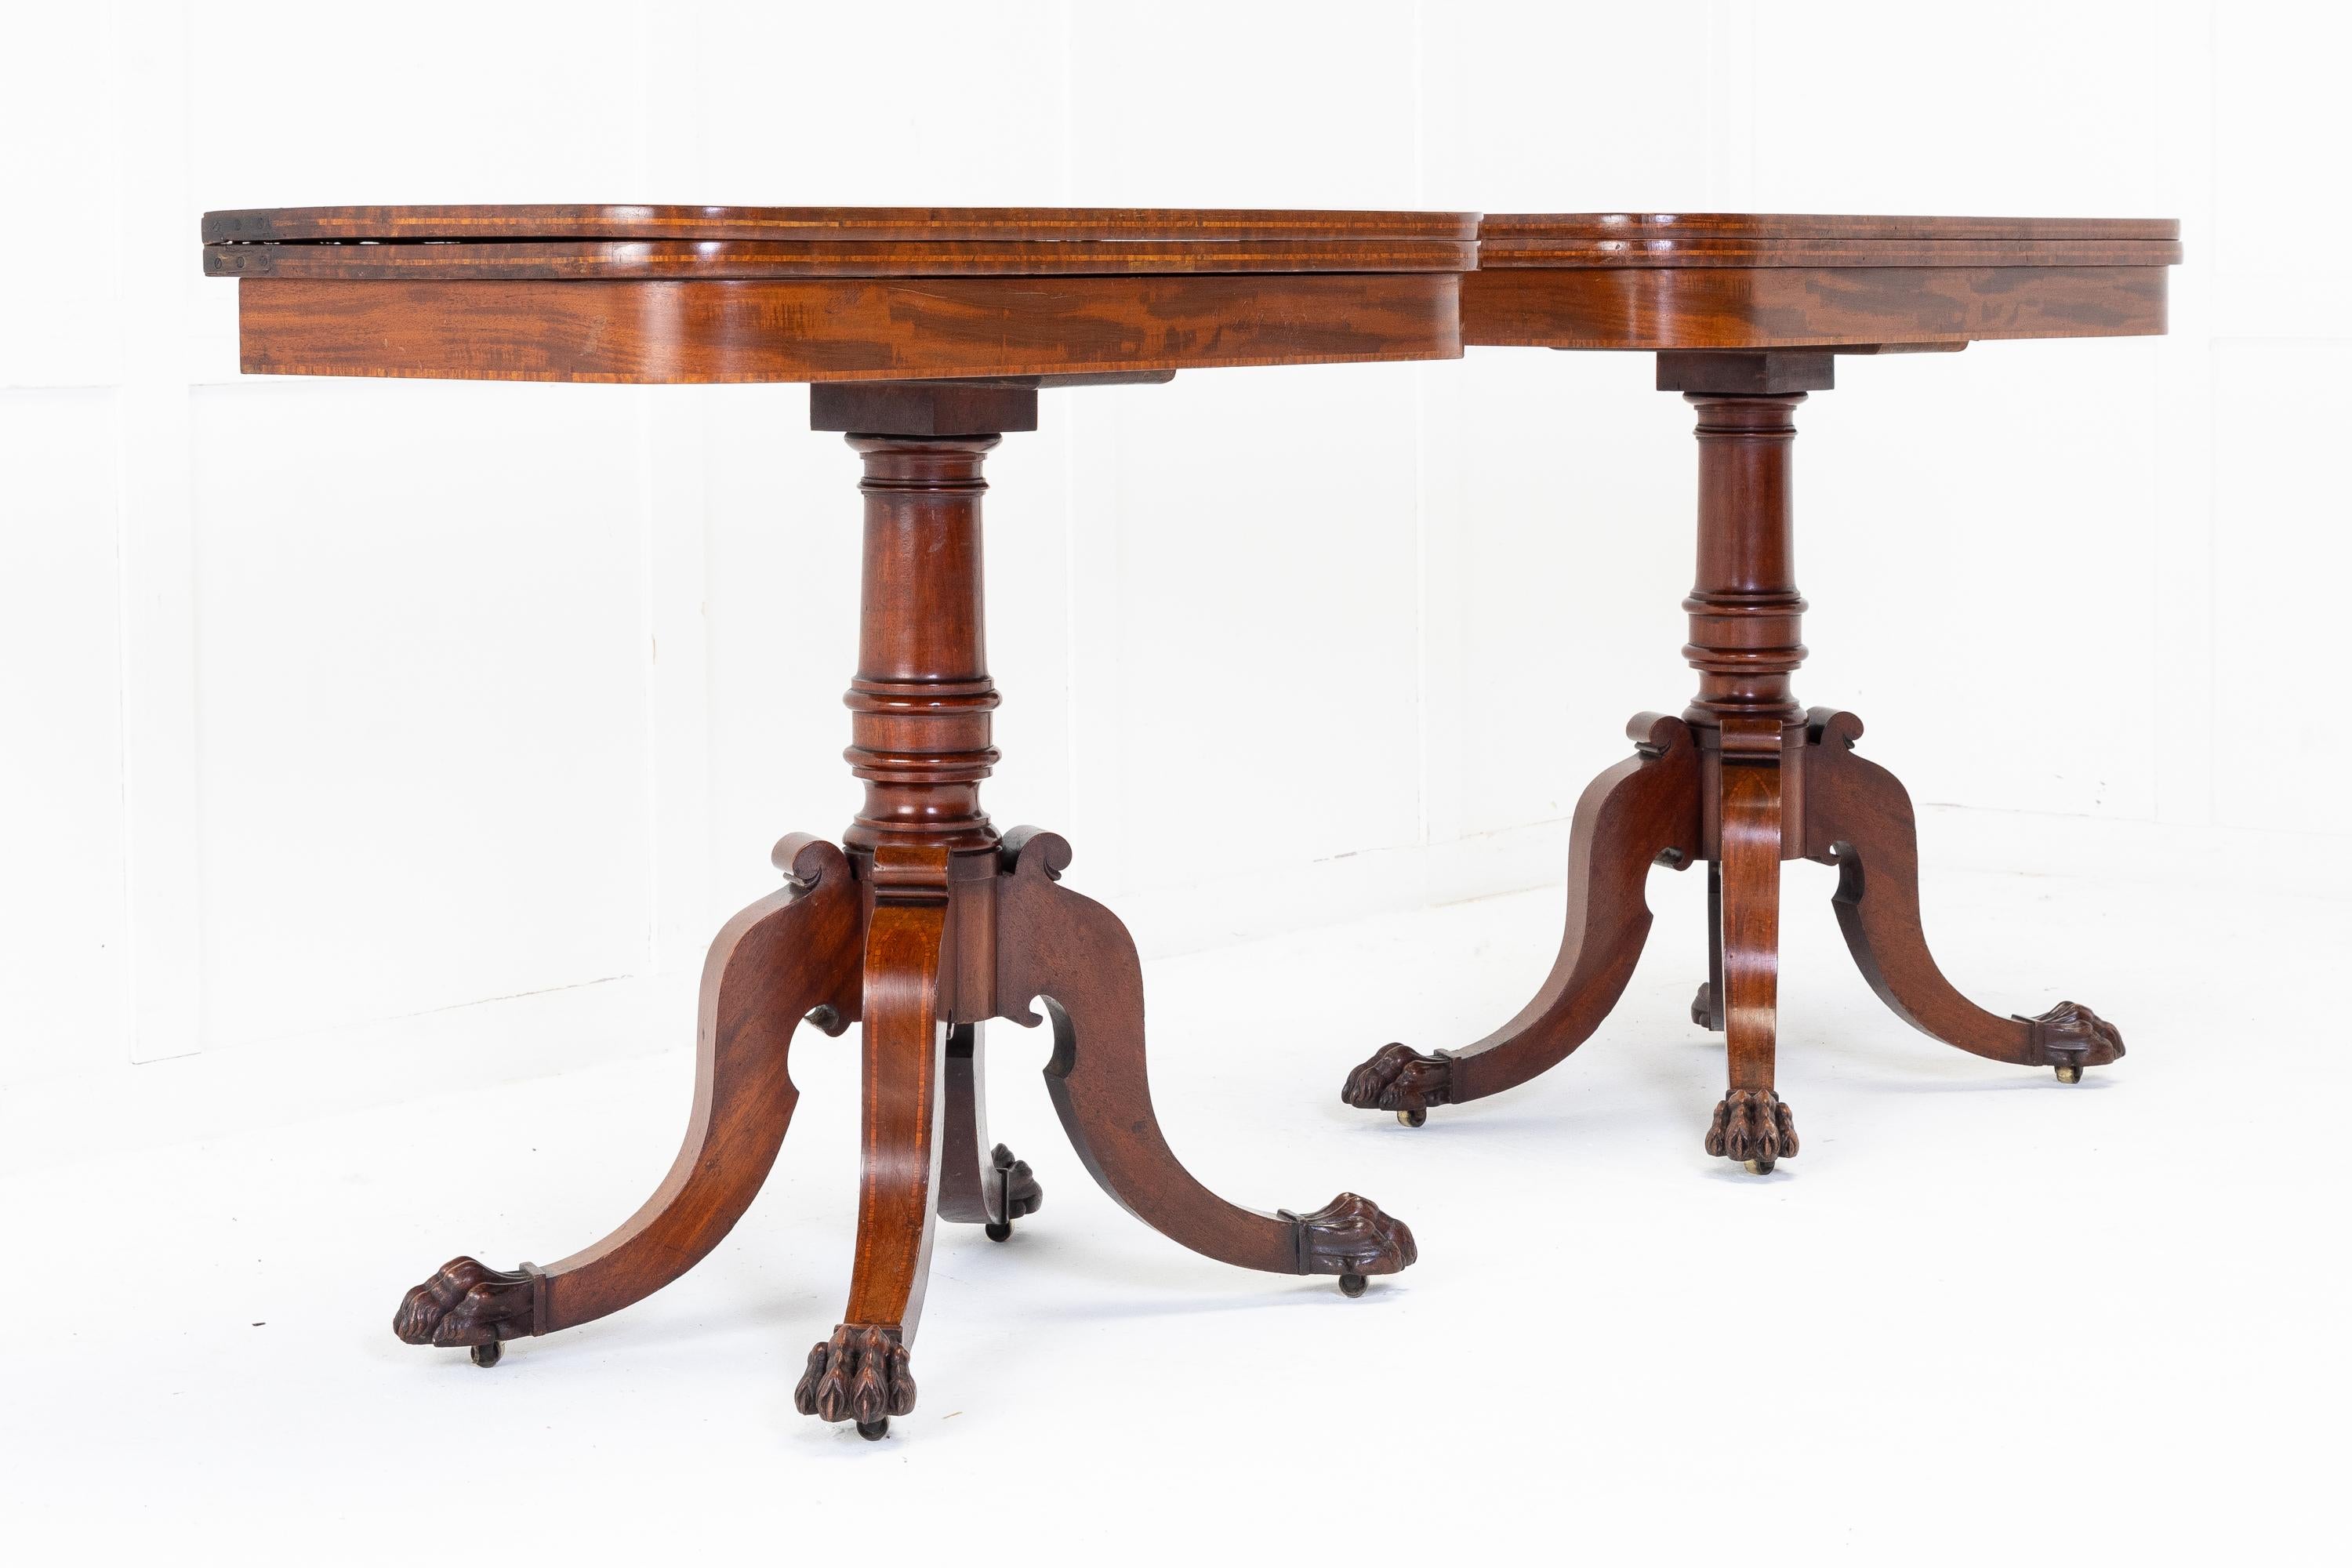 A very good pair of Regency card tables with fold-over D-shaped tops with satinwood crossbanding. The well figured mahogany tops, above a shallow frieze, open to reveal the old green baize. Supported by elegant turned columns and raised on